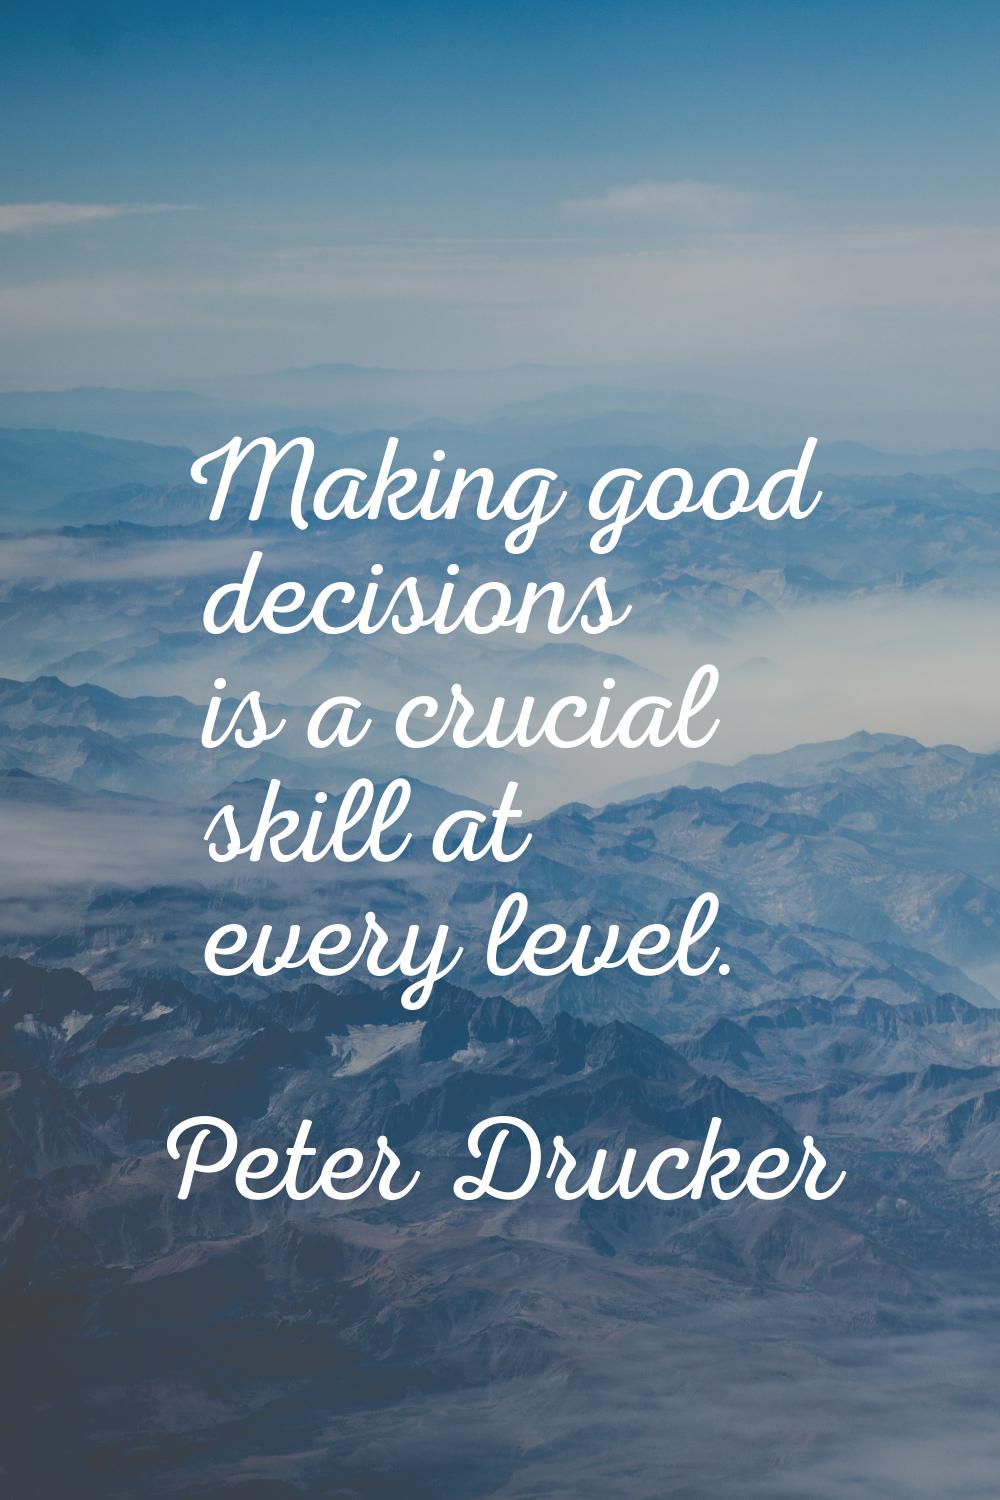 Making good decisions is a crucial skill at every level.